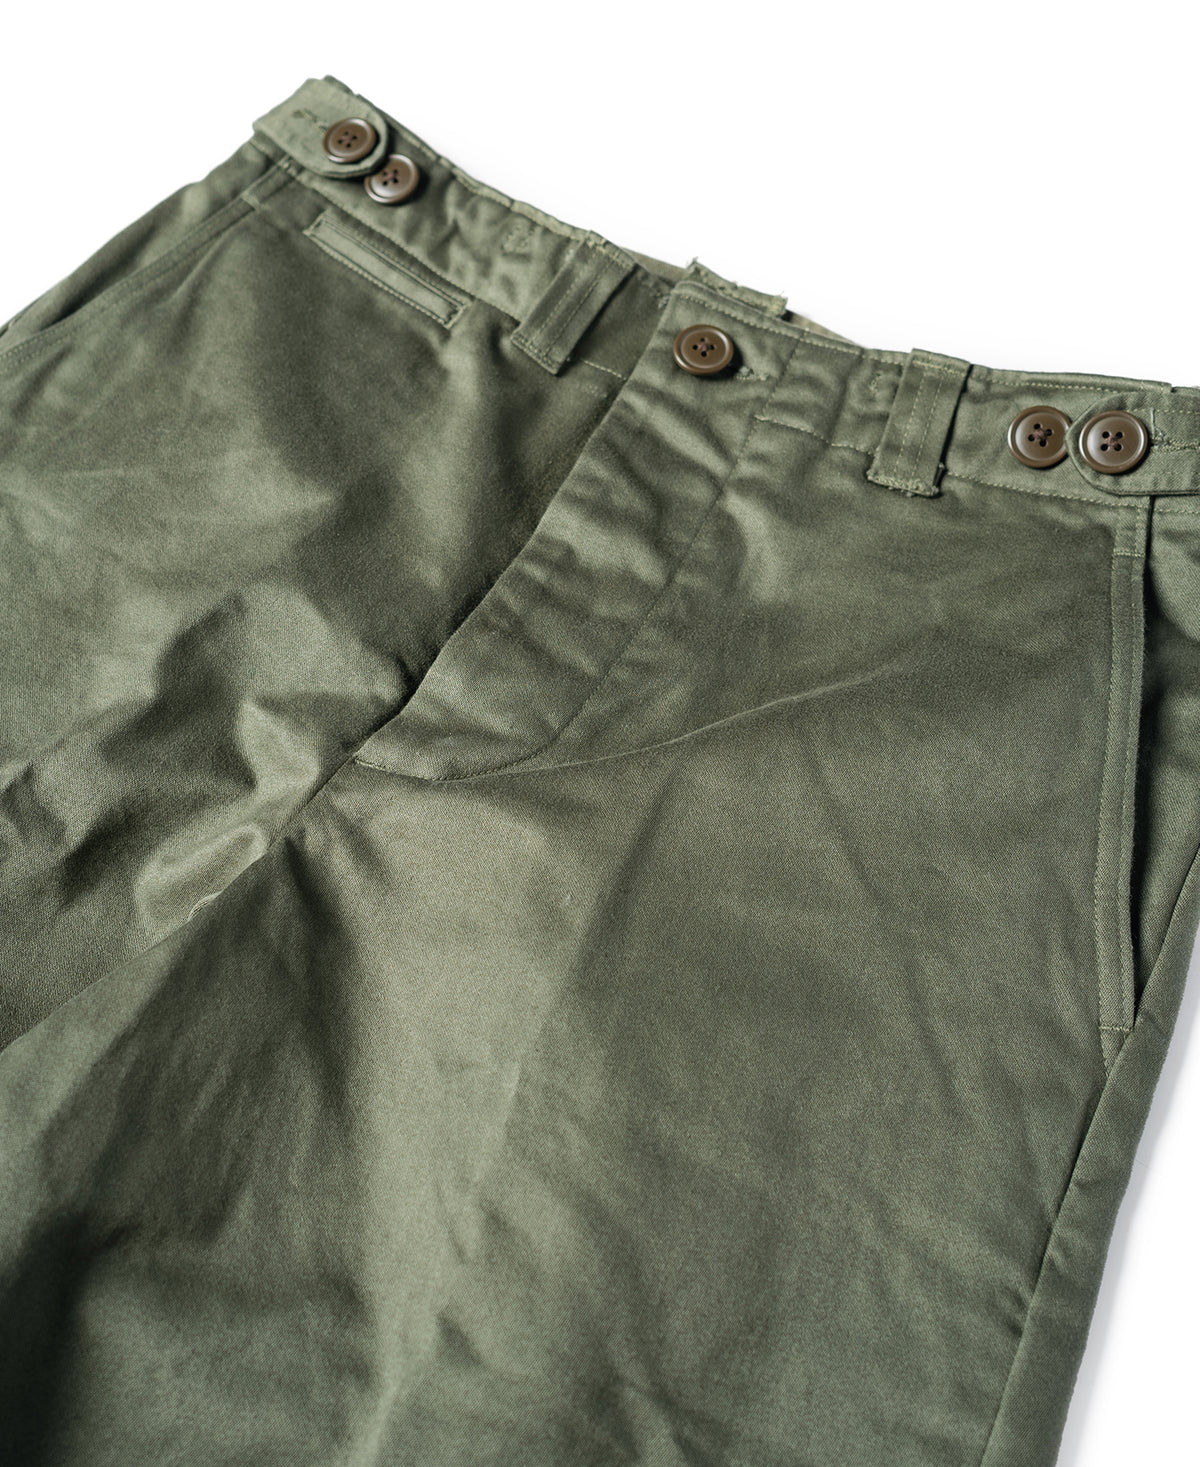 US Army M-43 Field Trousers | Men's Vintage Military Pants | Bronson